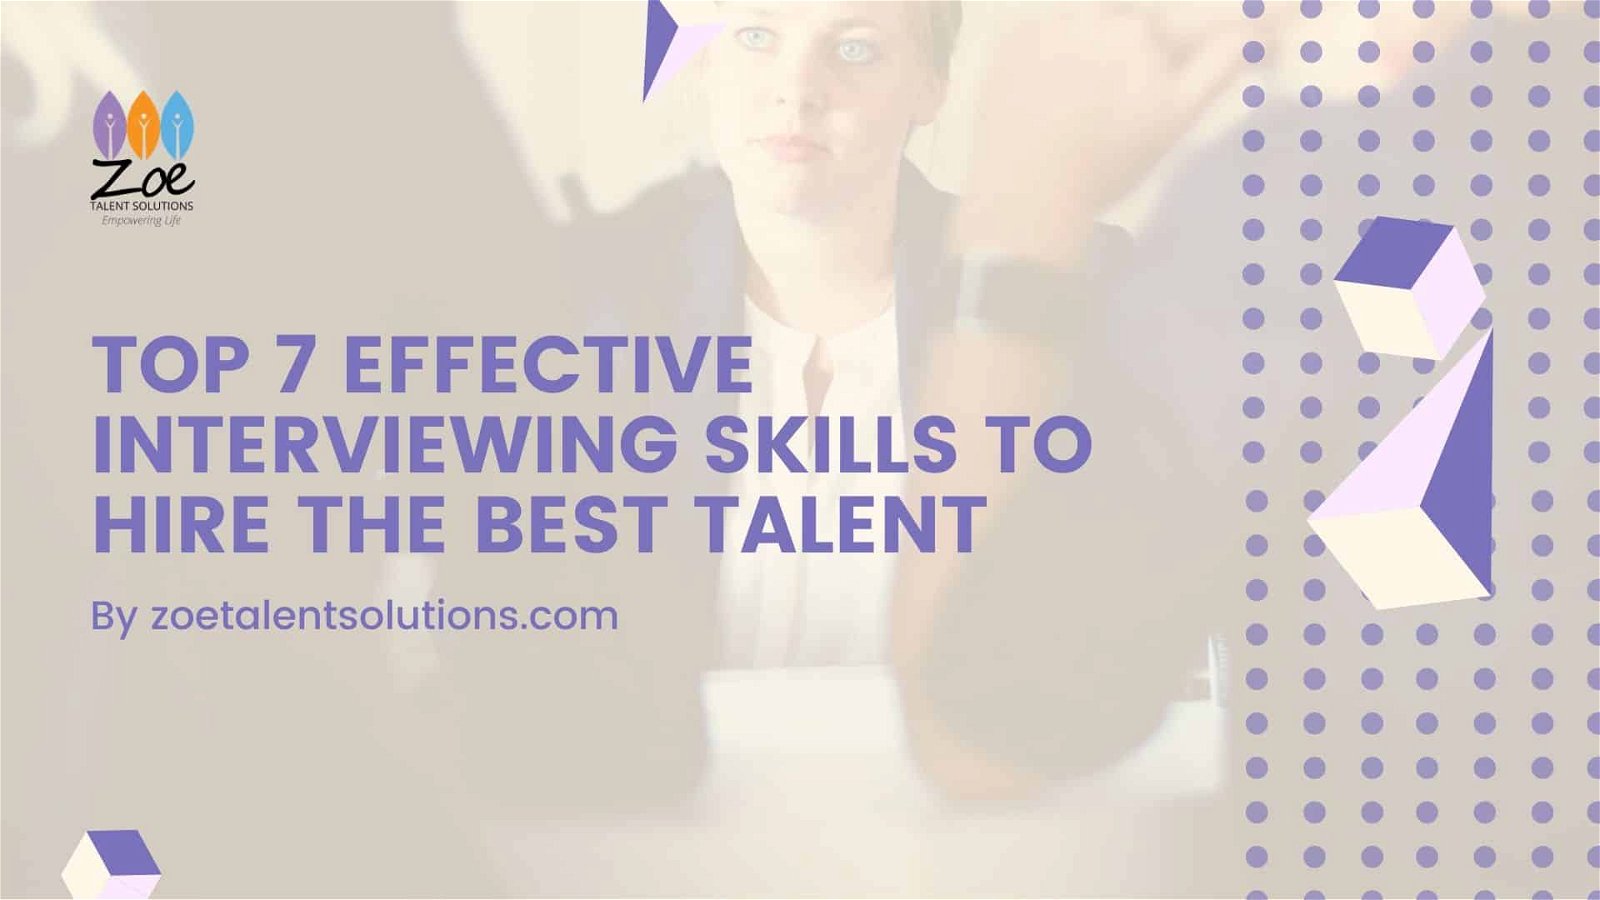 Top 7 Effective Interviewing Skills to Hire the Best Talent